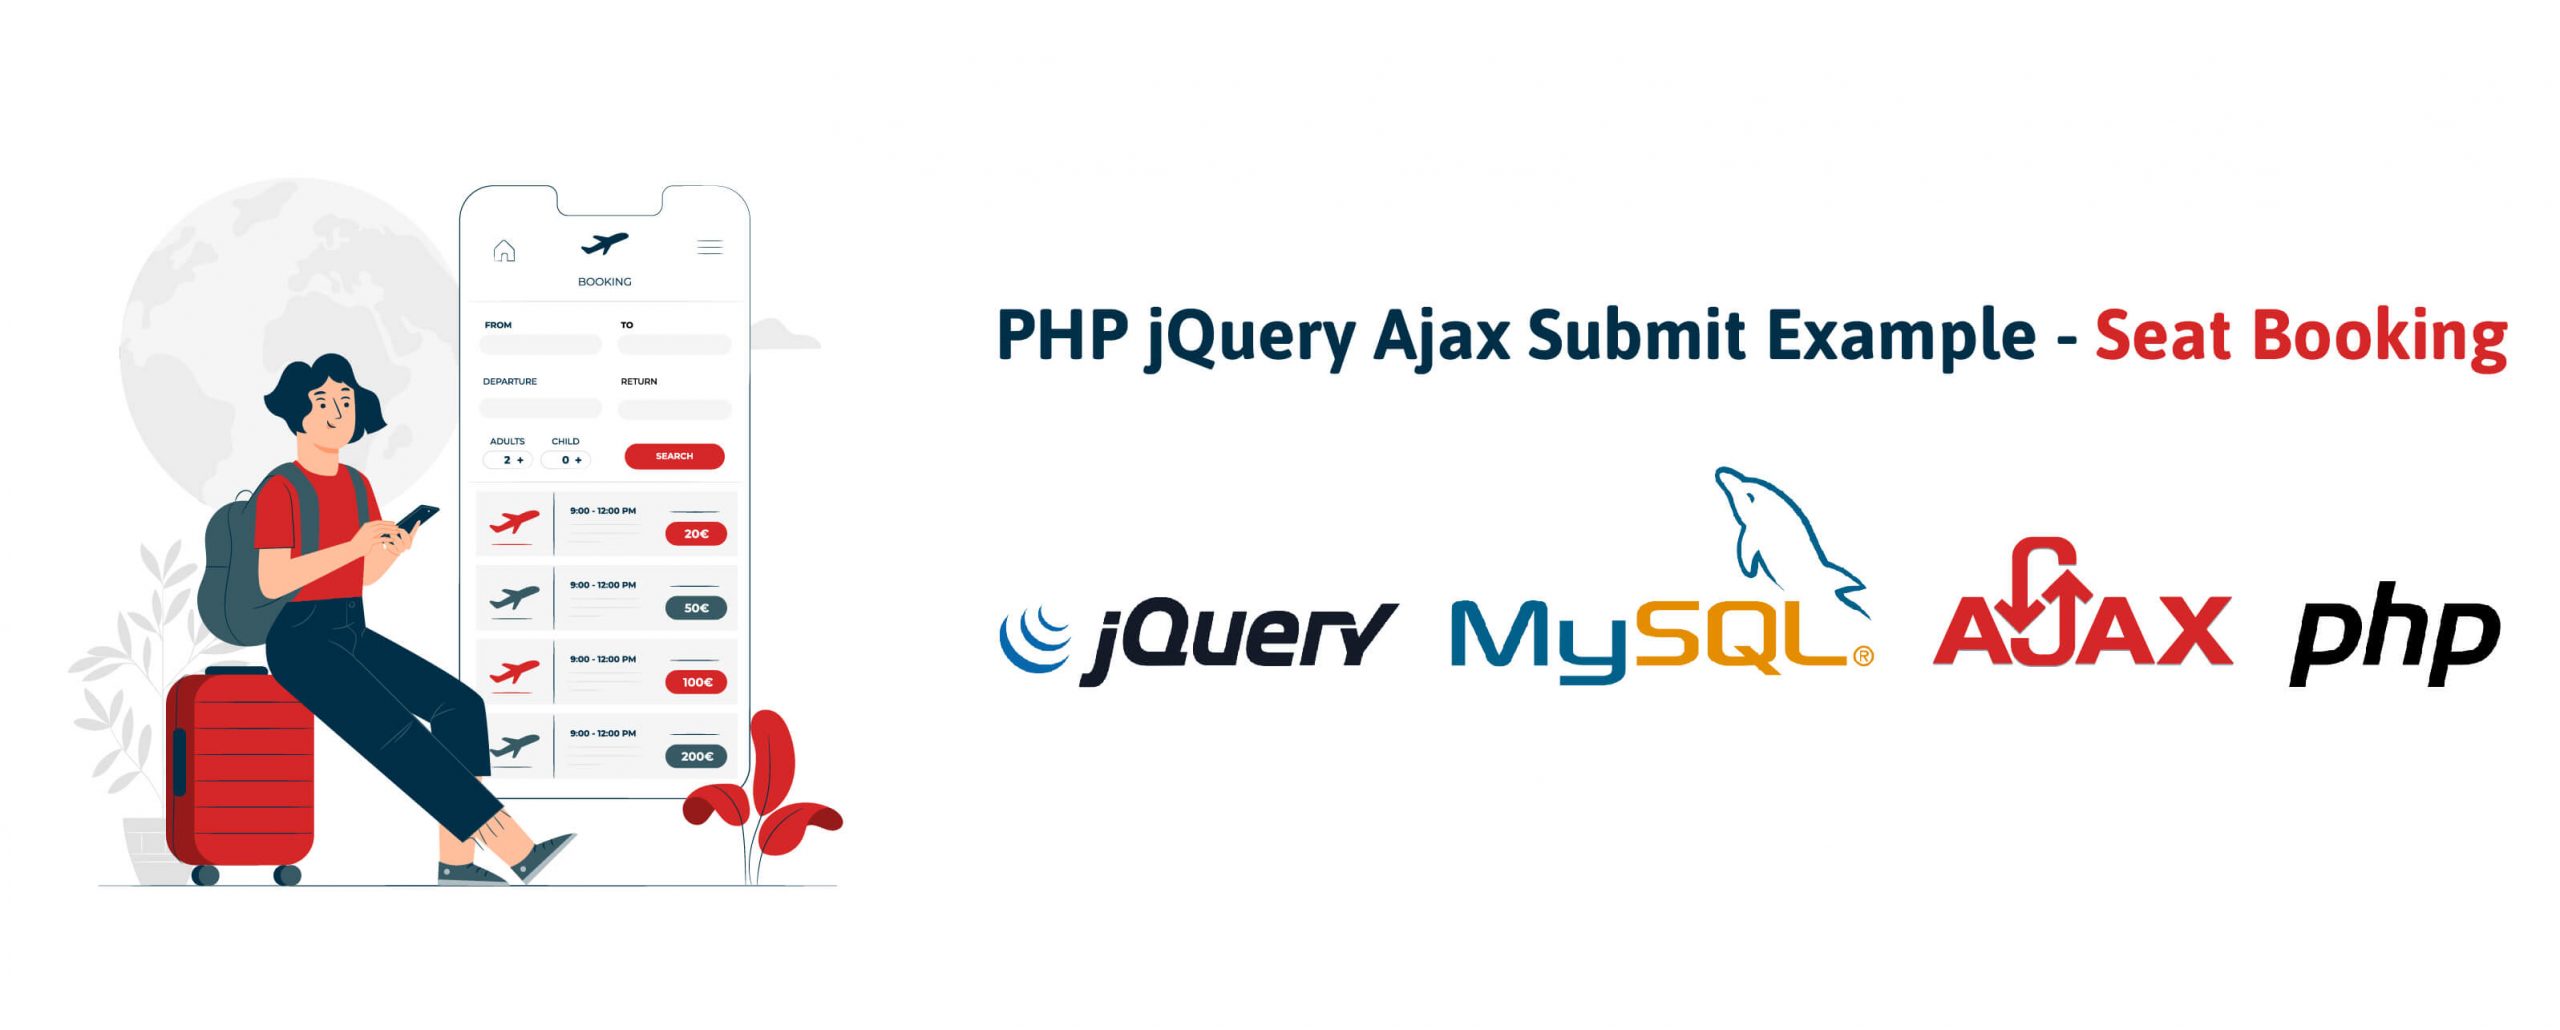 PHP jQuery Ajax Form Submit Example - Seat Booking